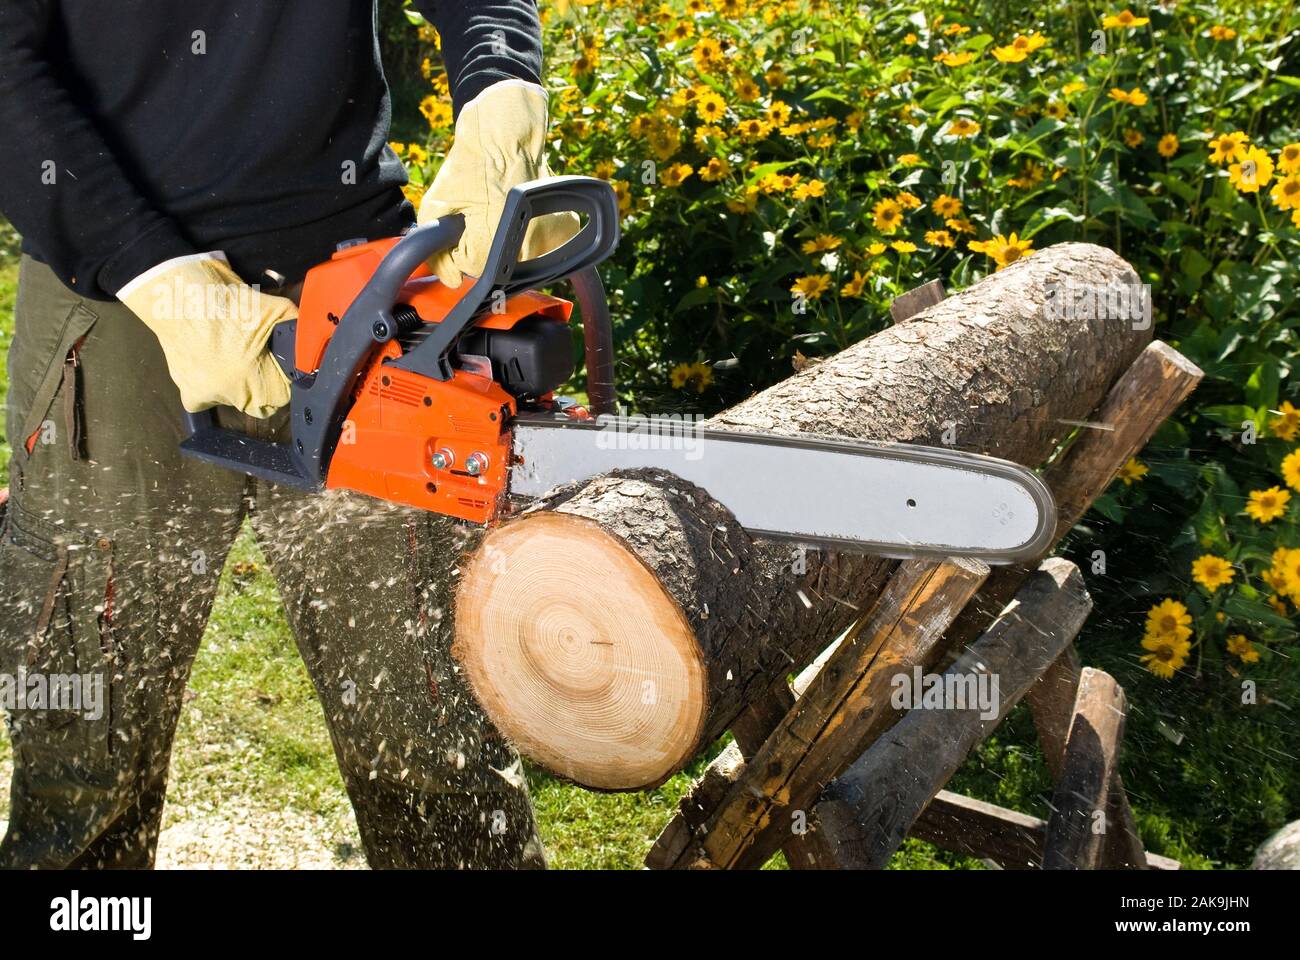 The chainsaw cutts the log of wood Stock Photo